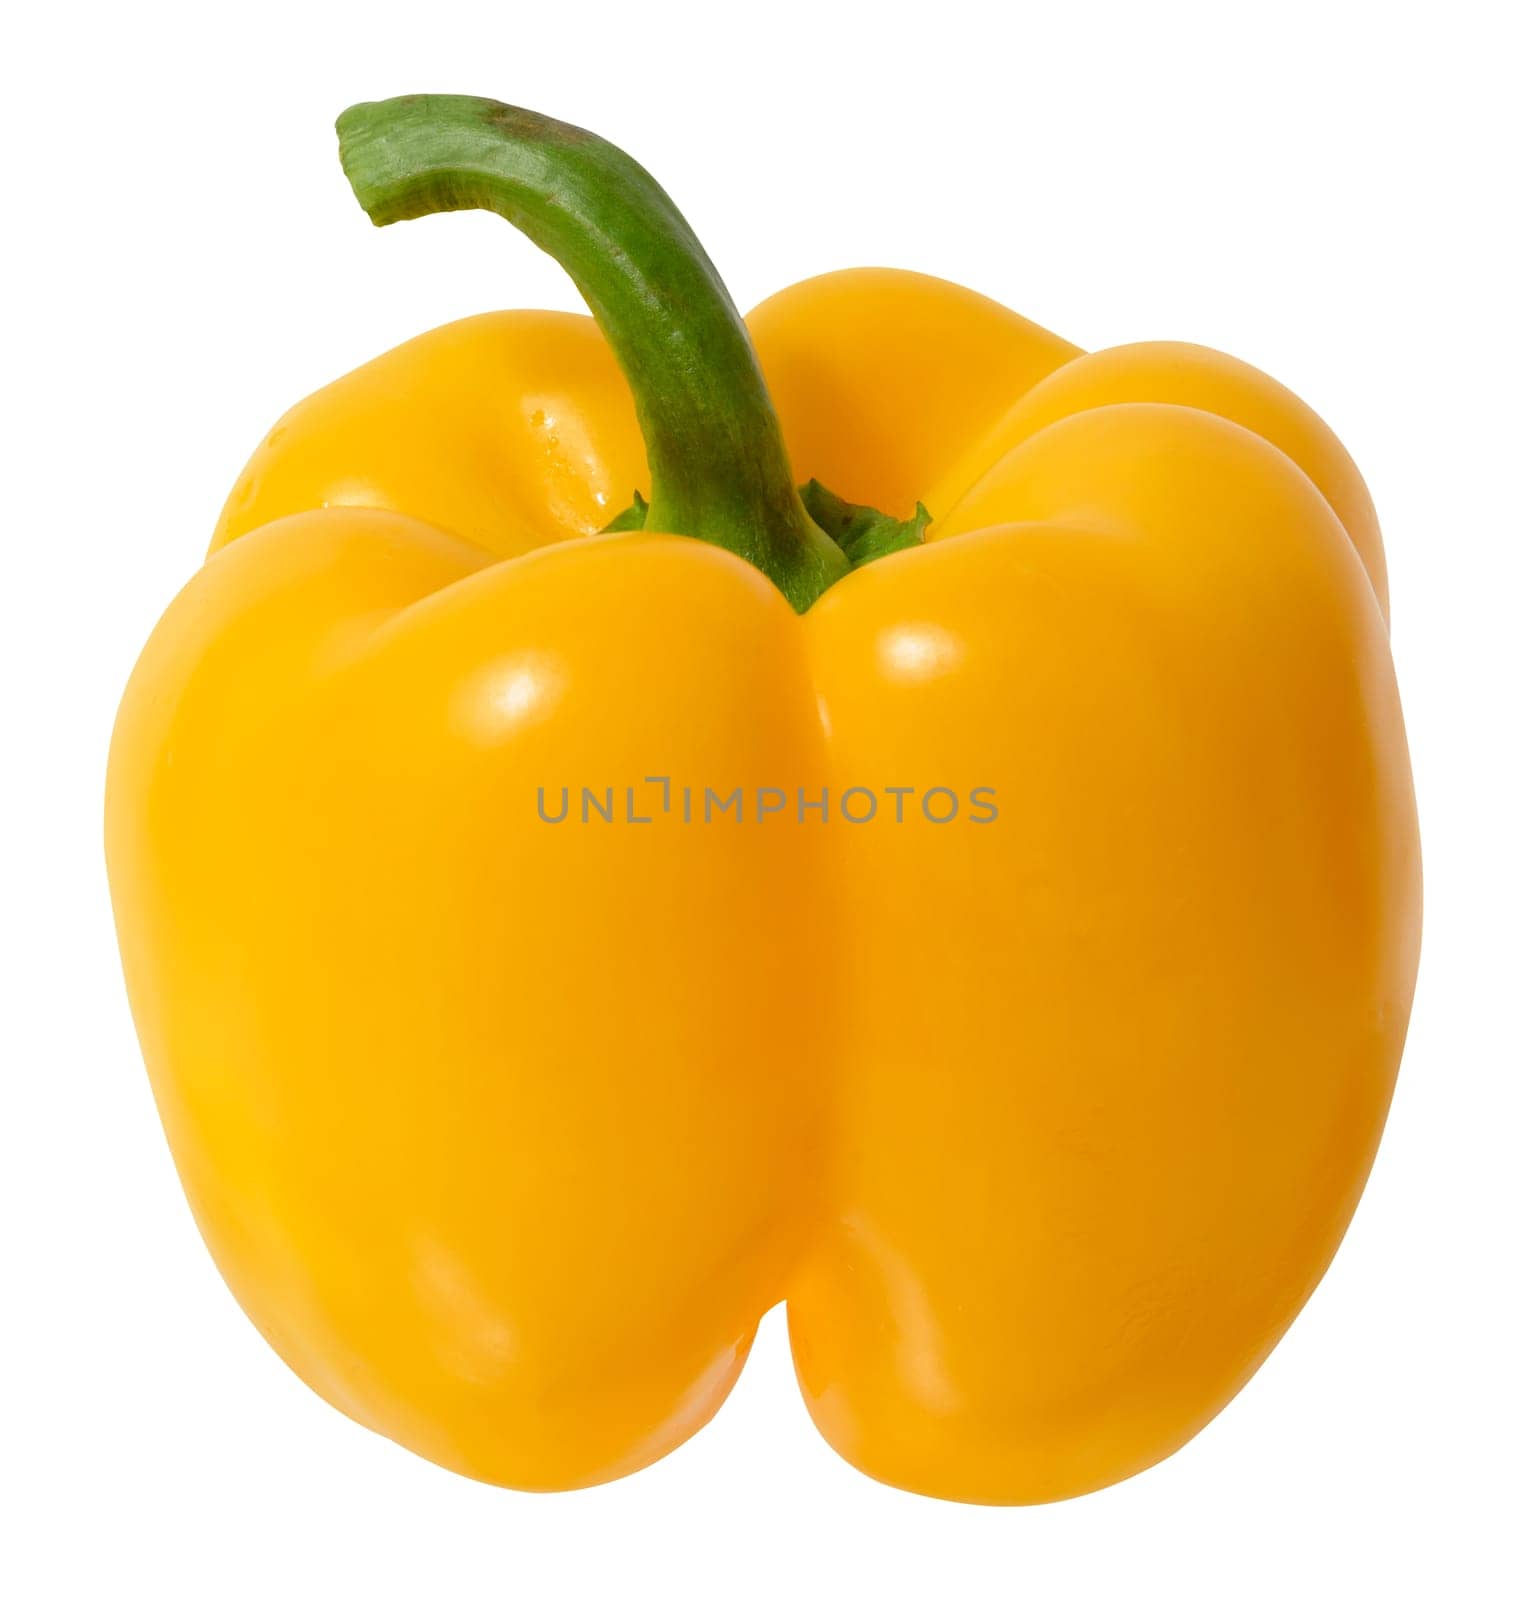 Whole yellow bell pepper isolated on white background, juicy and healthy vegetable by ndanko